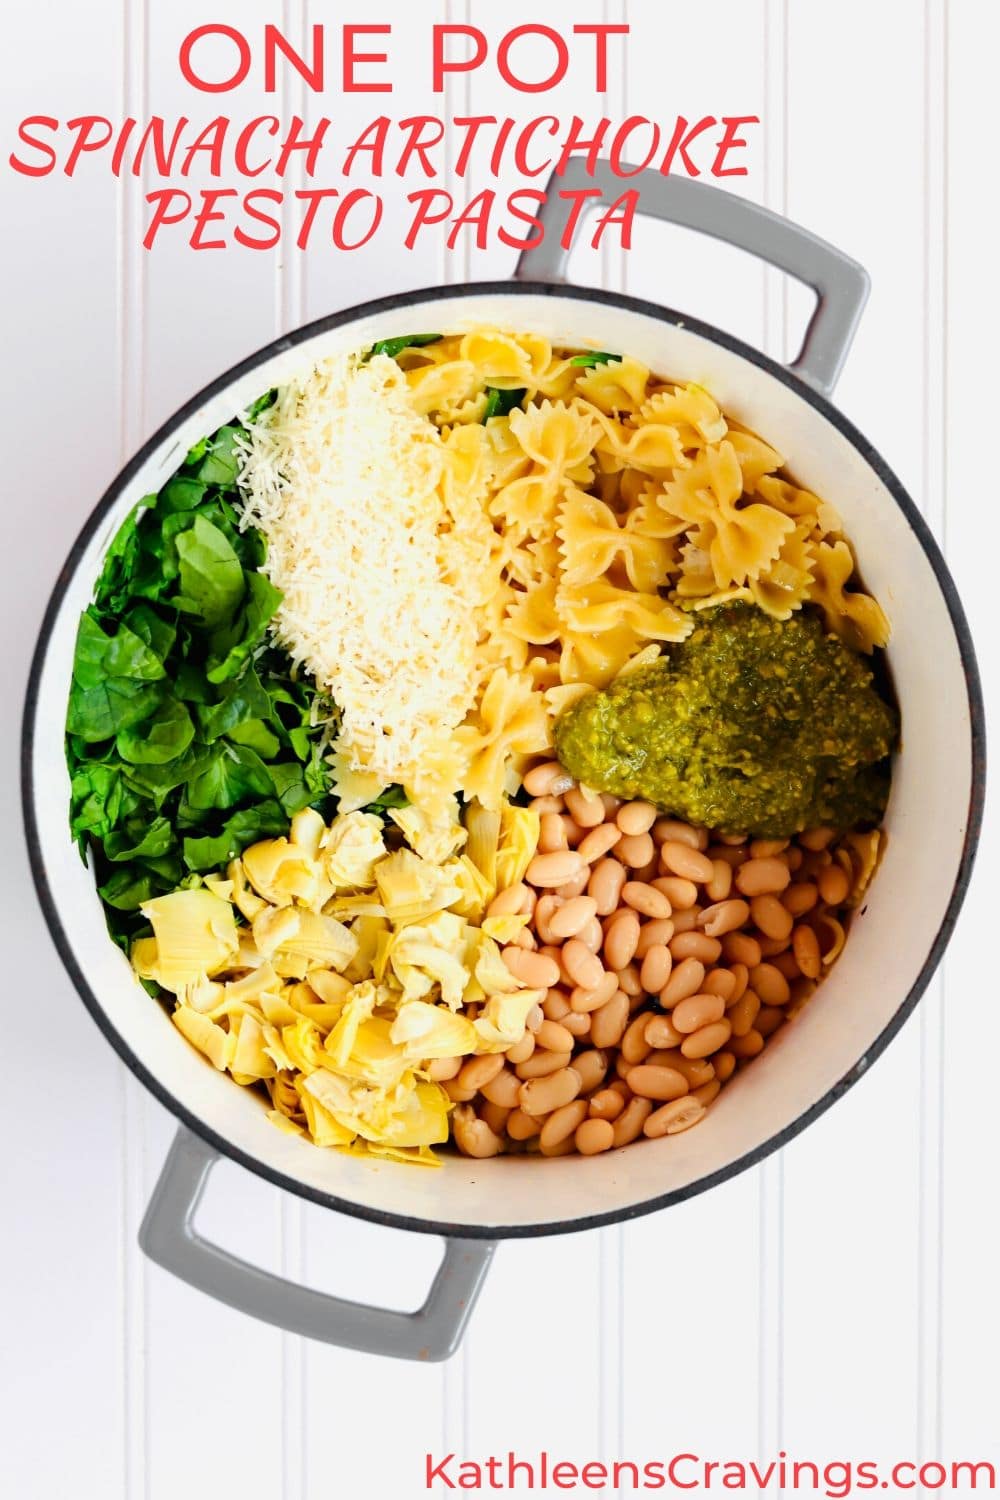 One Pot Spinach Artichoke Pesto Pasta ingredients with text